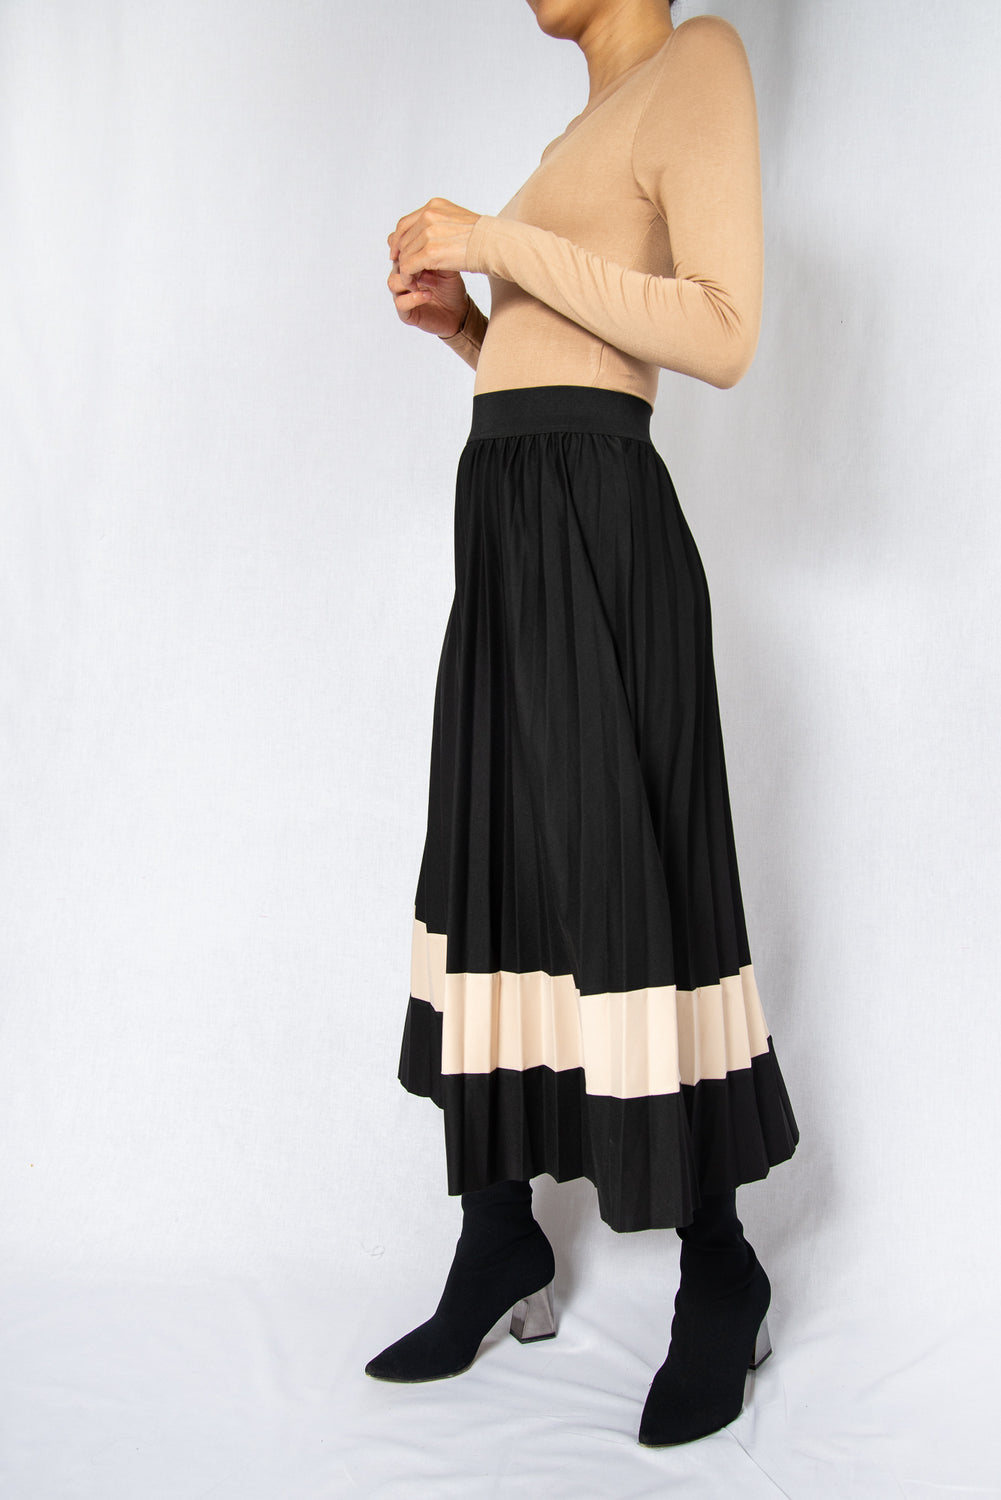 MODZ Black Loose Pleated Midi Skirt with Contrast Beige Modest Flowy Below-The-Knee Skirt With Stripe in Polyester